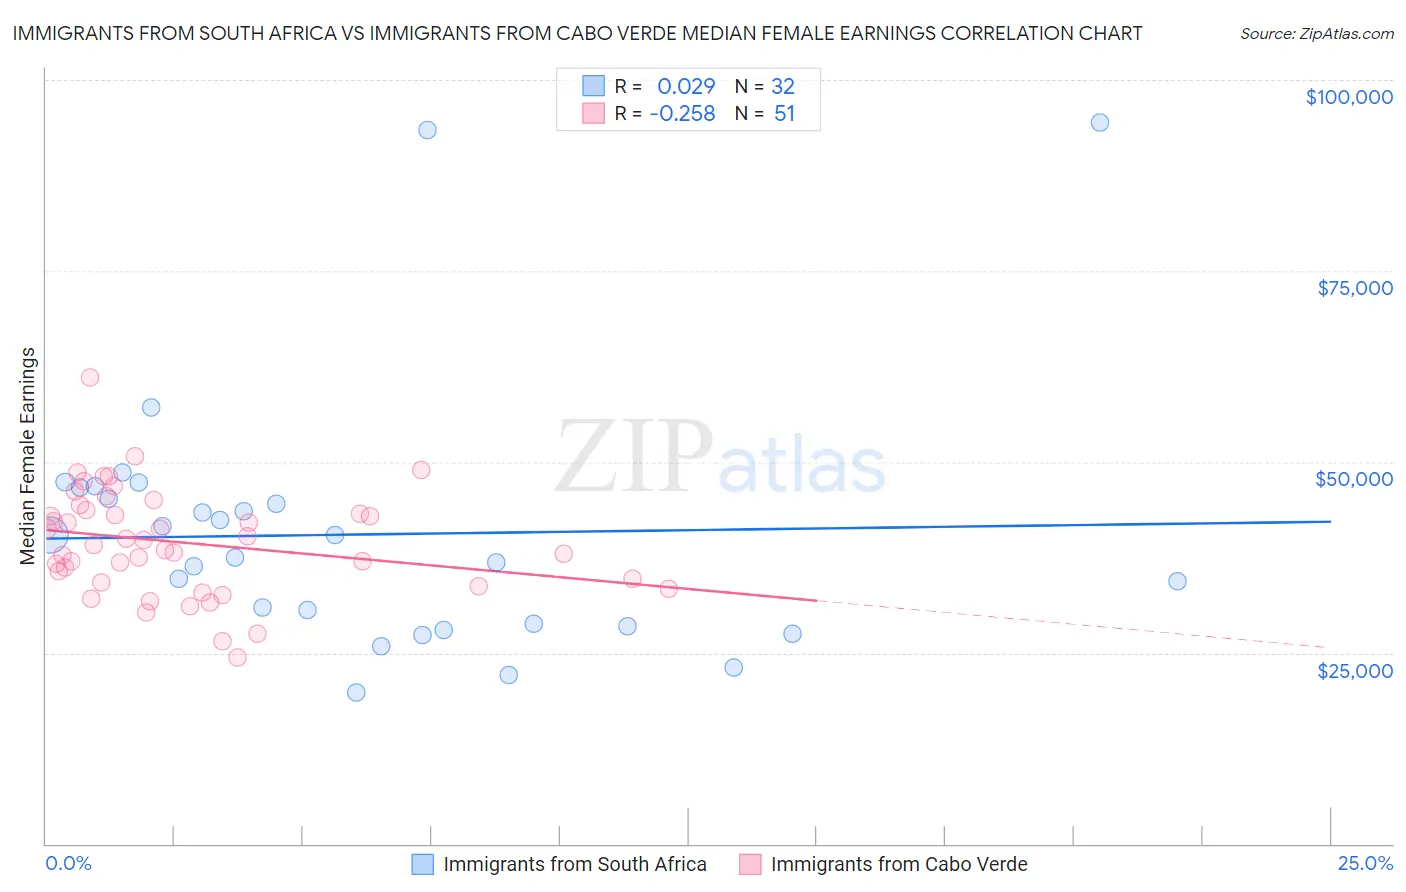 Immigrants from South Africa vs Immigrants from Cabo Verde Median Female Earnings